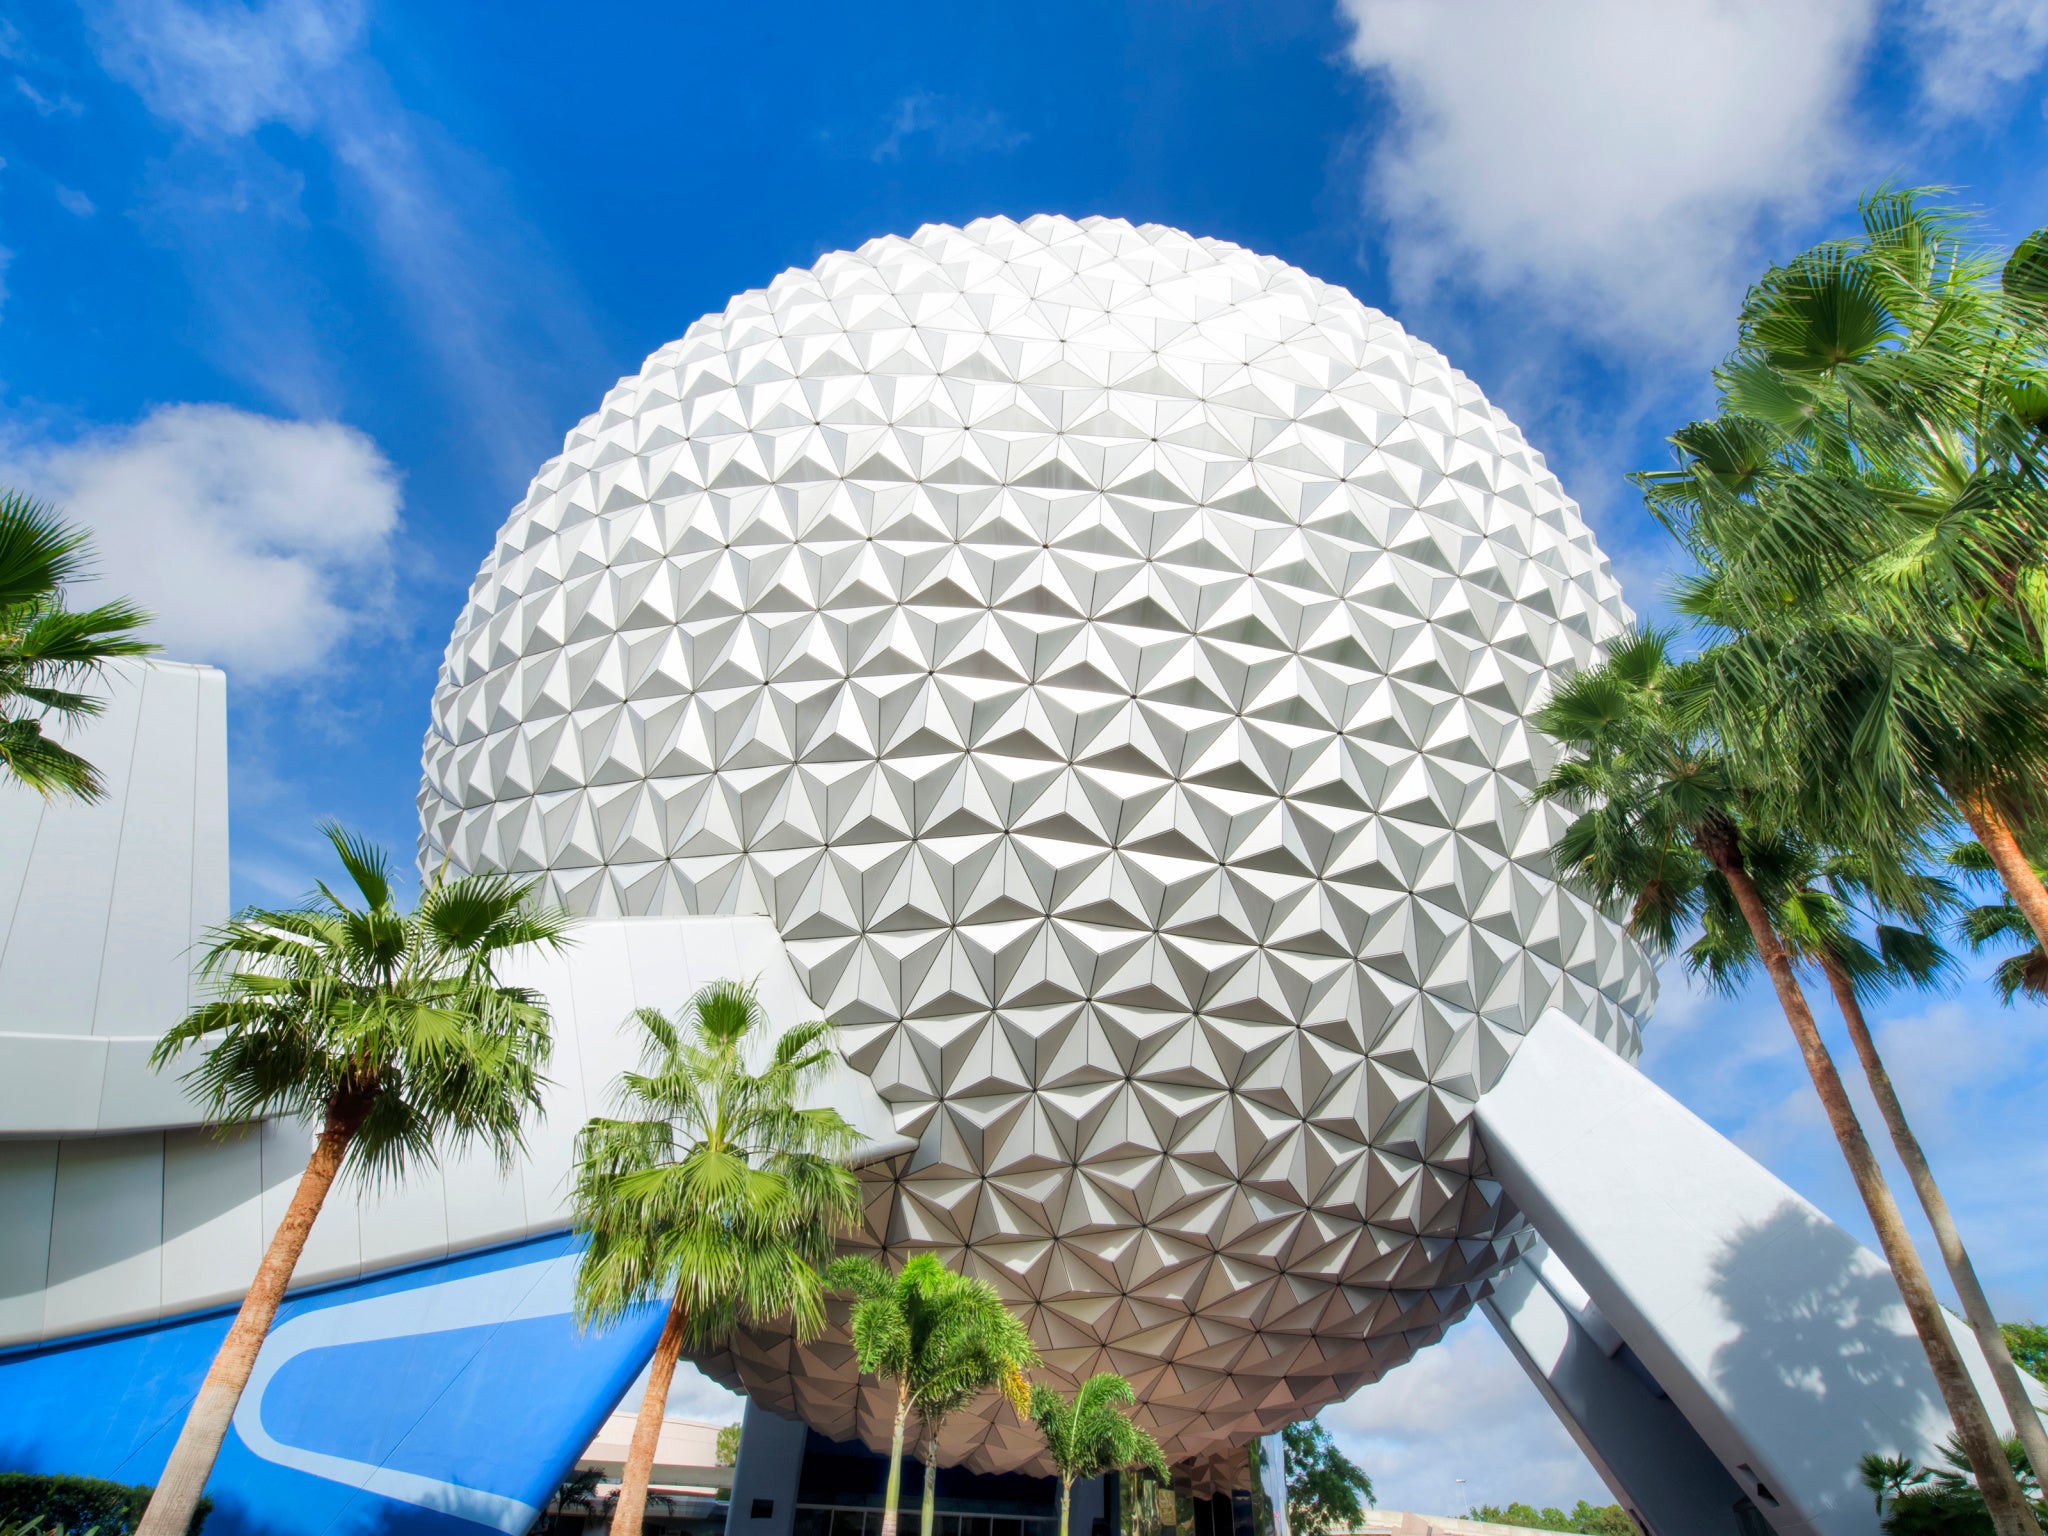 best theme parks in florida, from disney world to universal studios and more